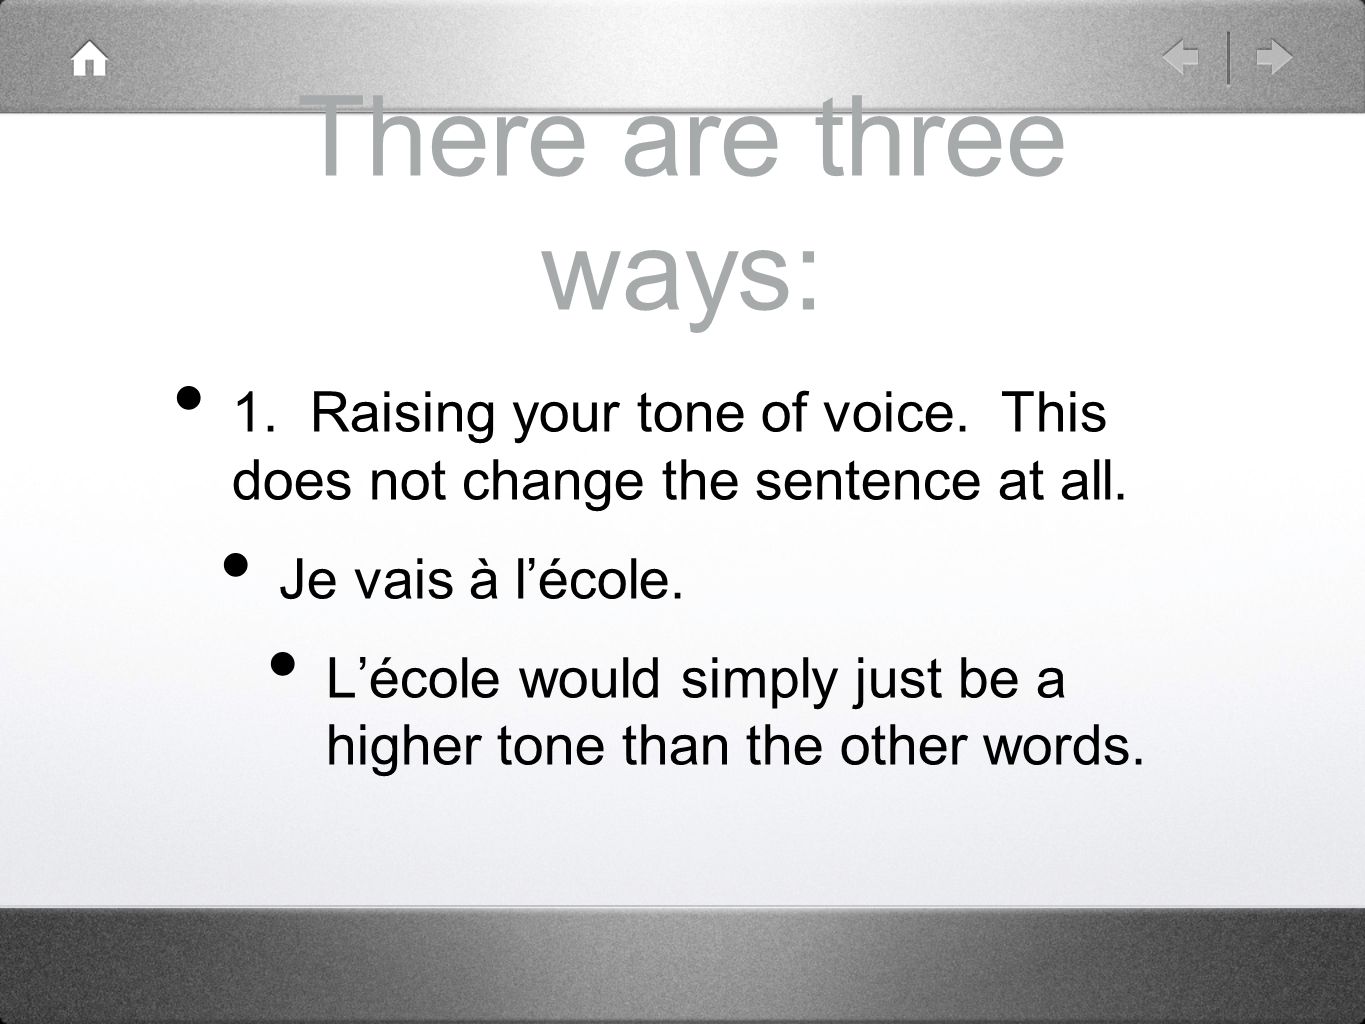 There are three ways: 1. Raising your tone of voice.